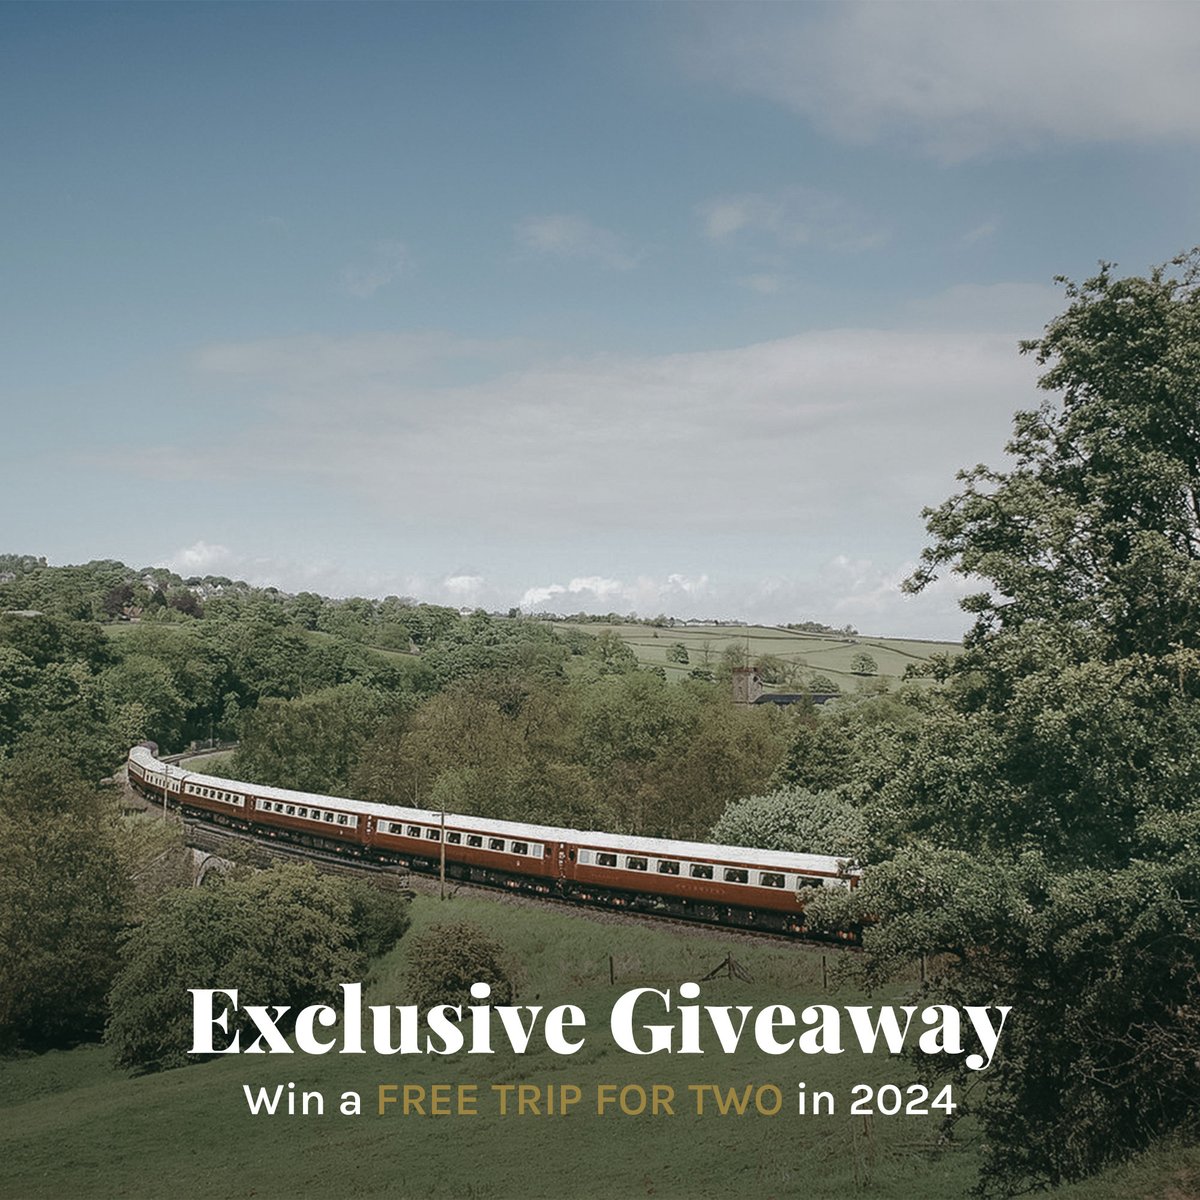 EXCLUSIVE GIVEAWAY Follow our new Instagram, share the giveaway post, and tag someone you’d love to bring along! You’ll be in with the chance to win a free trip for two on a lunch or afternoon tea! bit.ly/northernbelleuk 🥂